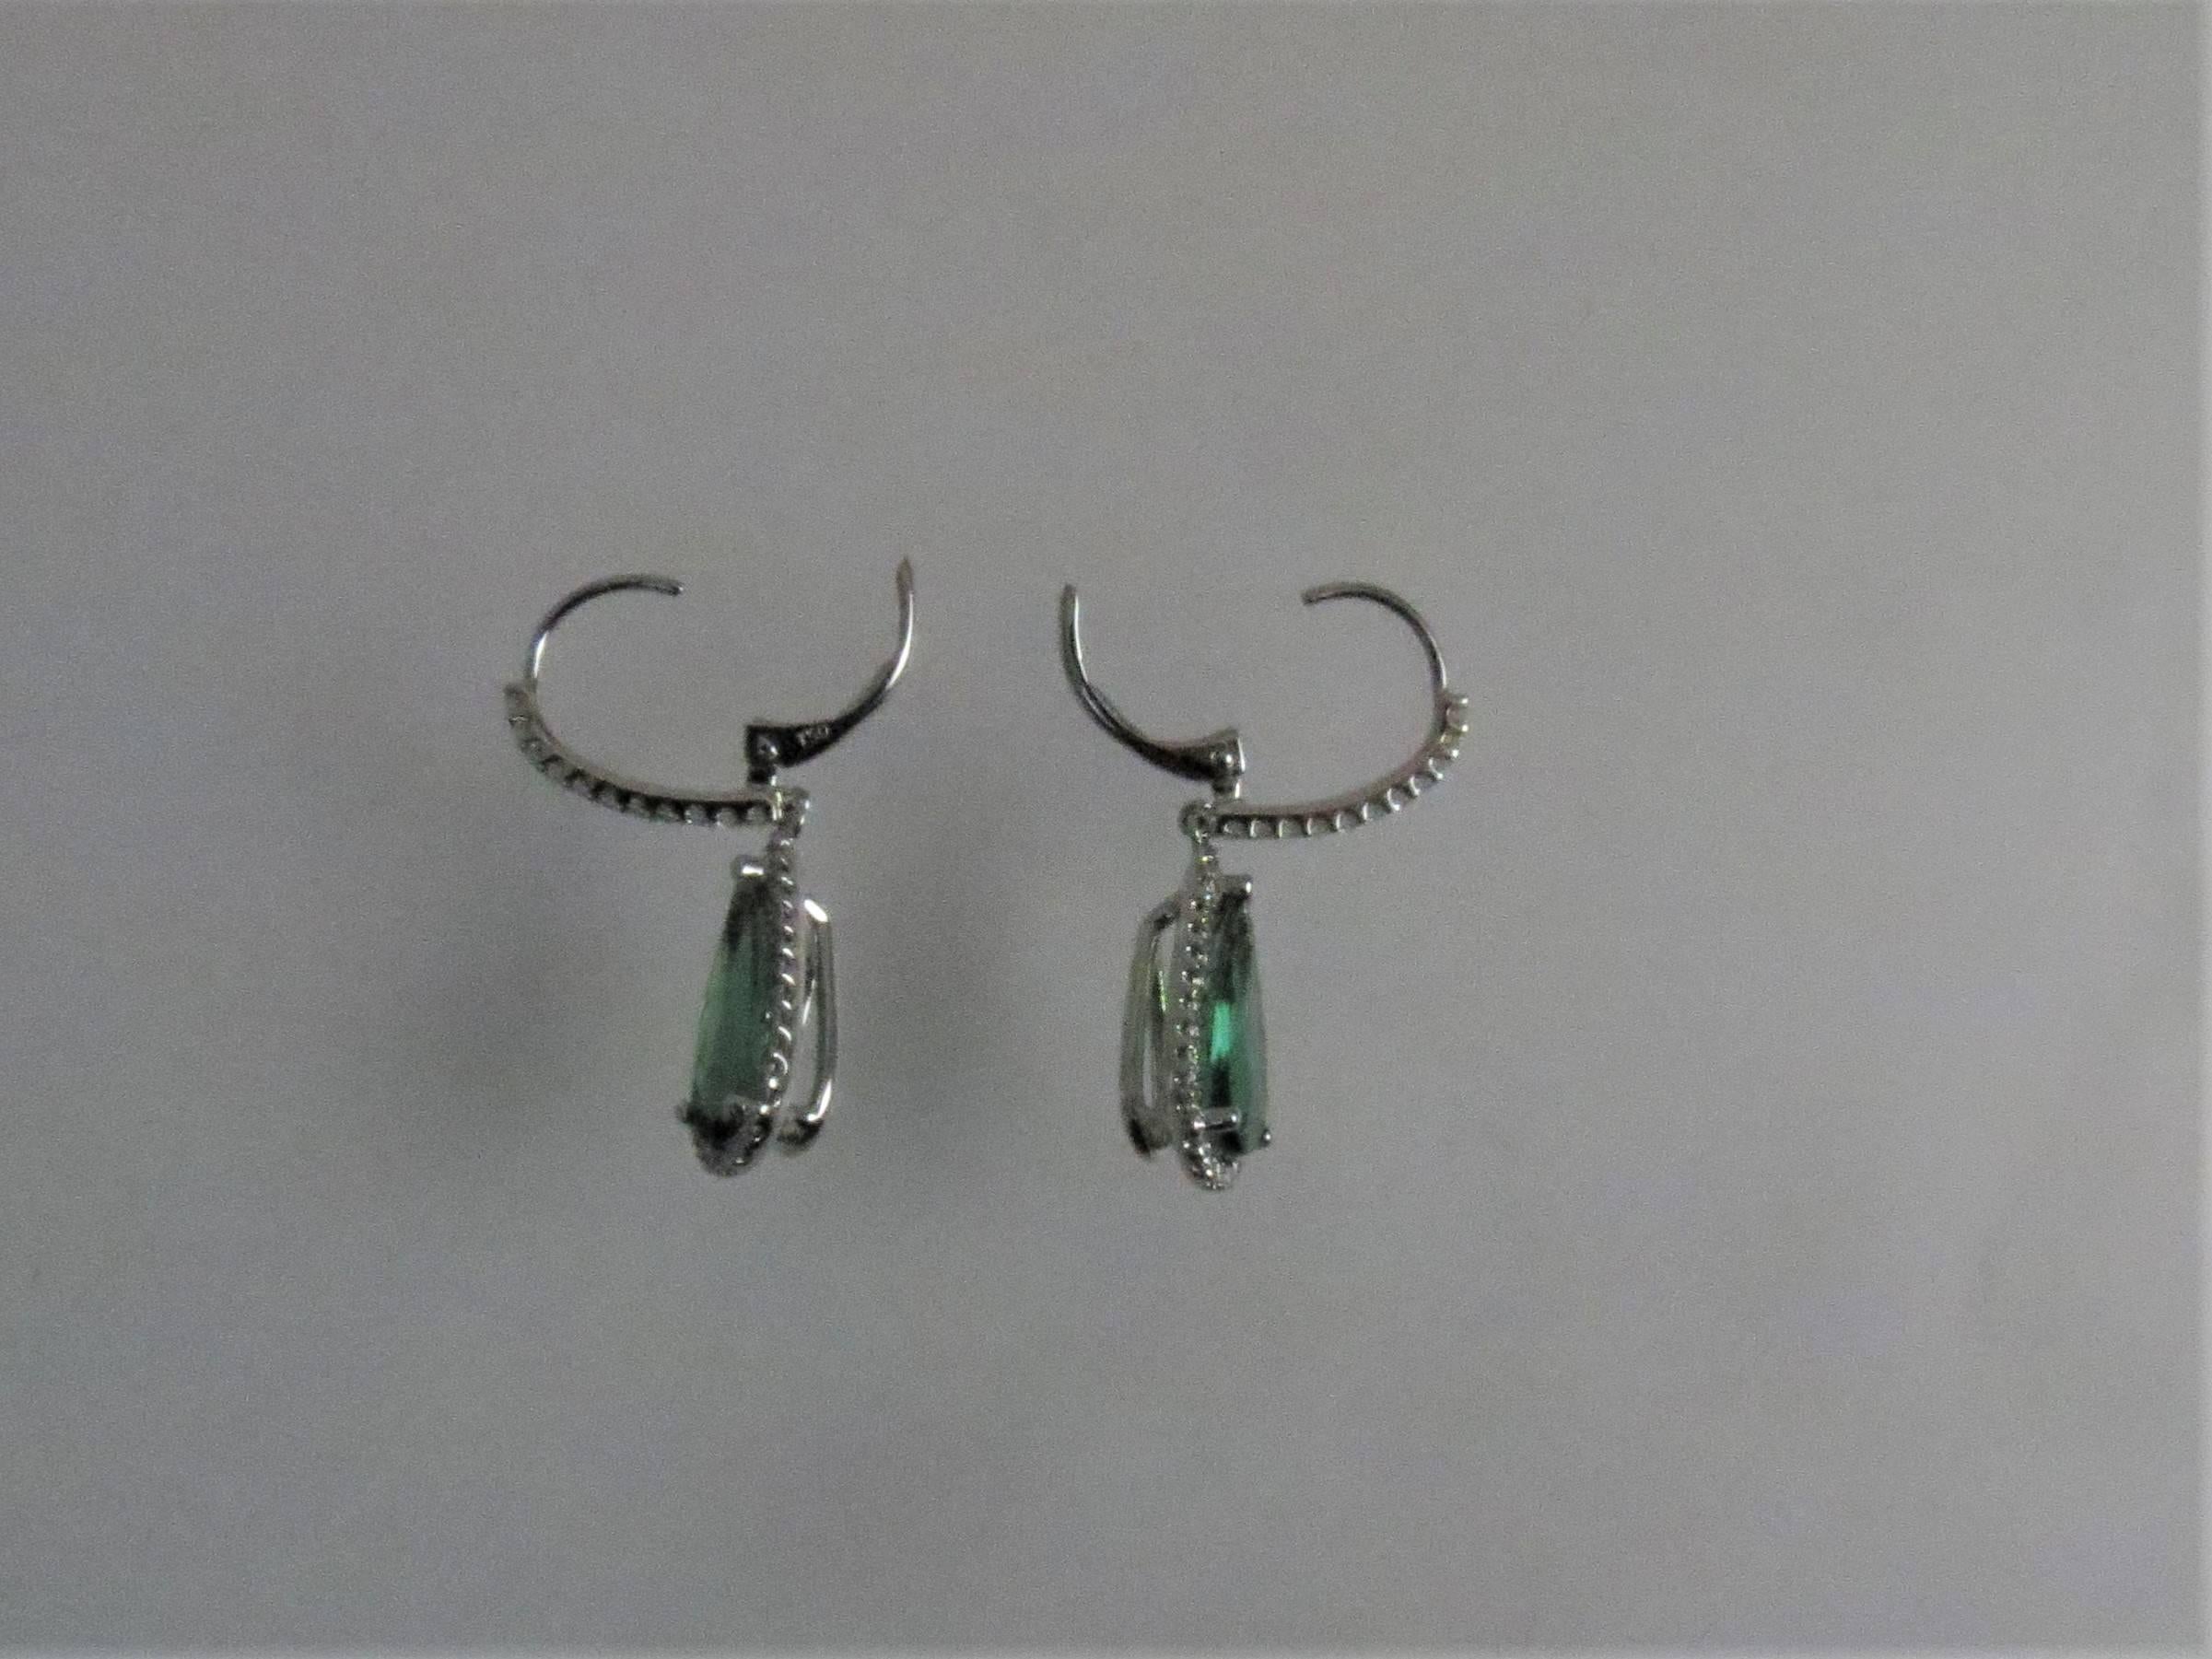 Contemporary 18 Karat White Gold Drop Earrings with Green Tourmalines and Diamonds